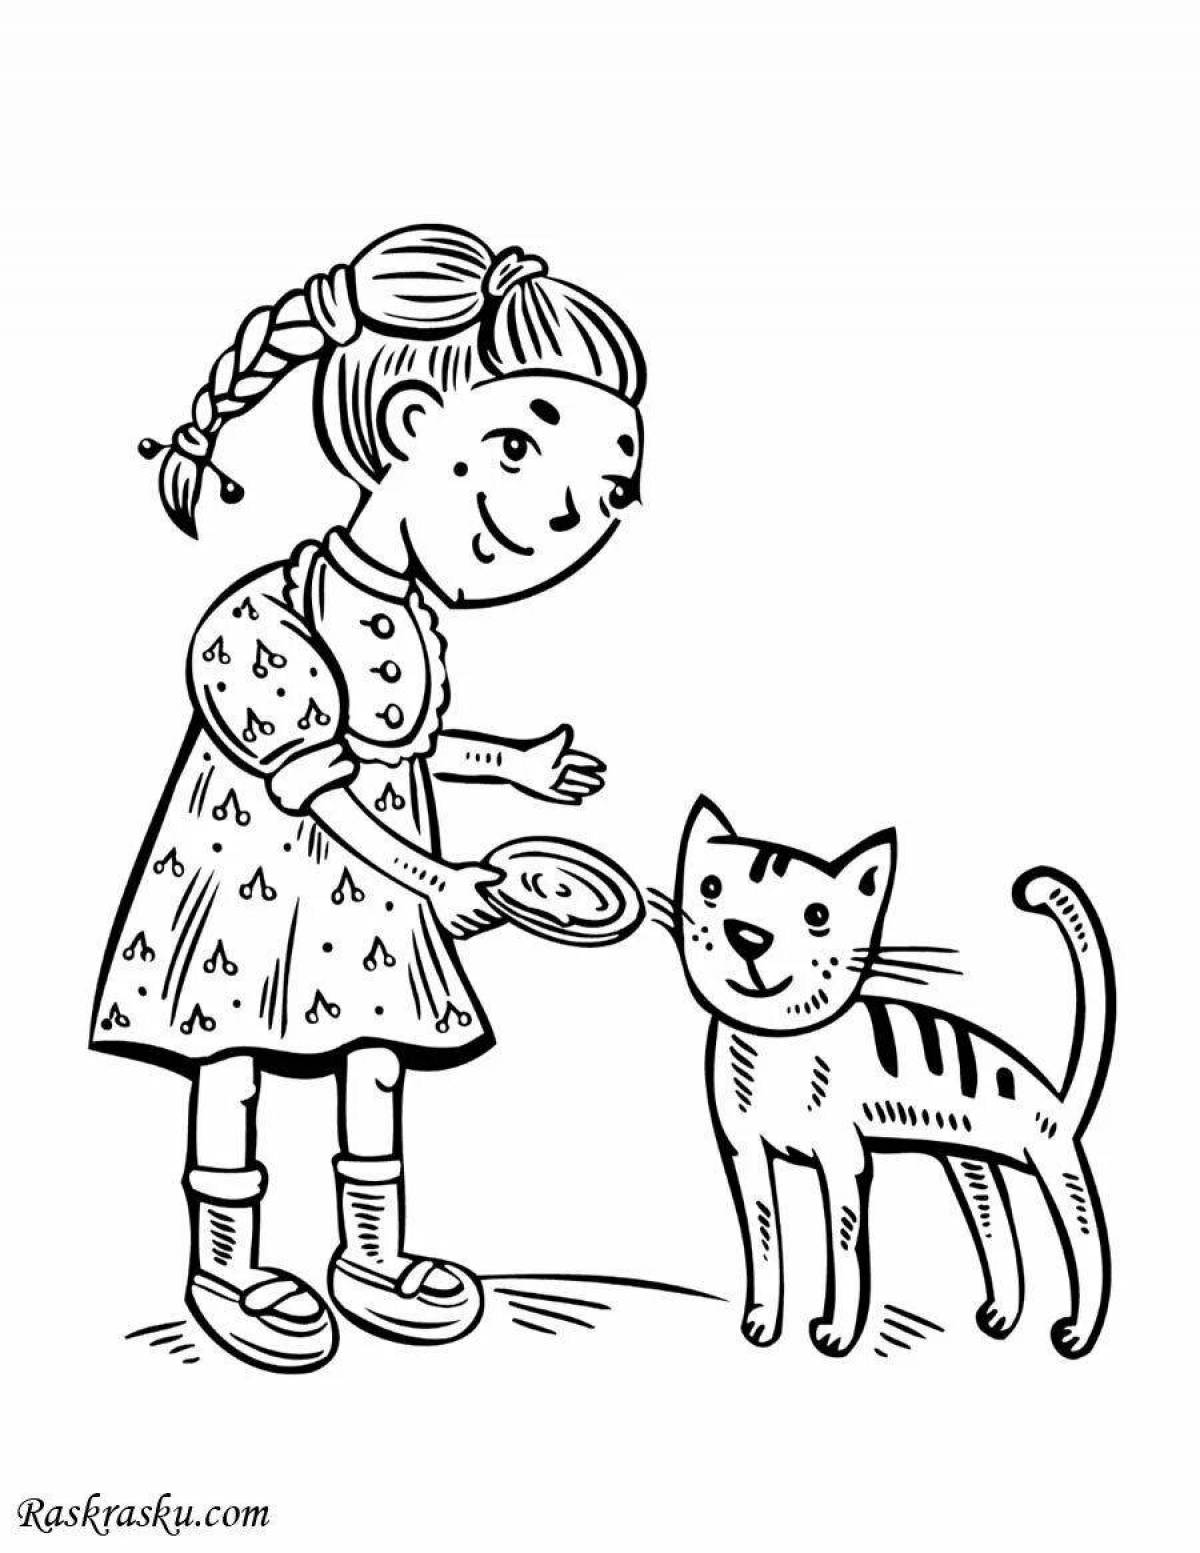 Serendipitous coloring page girl with a cat